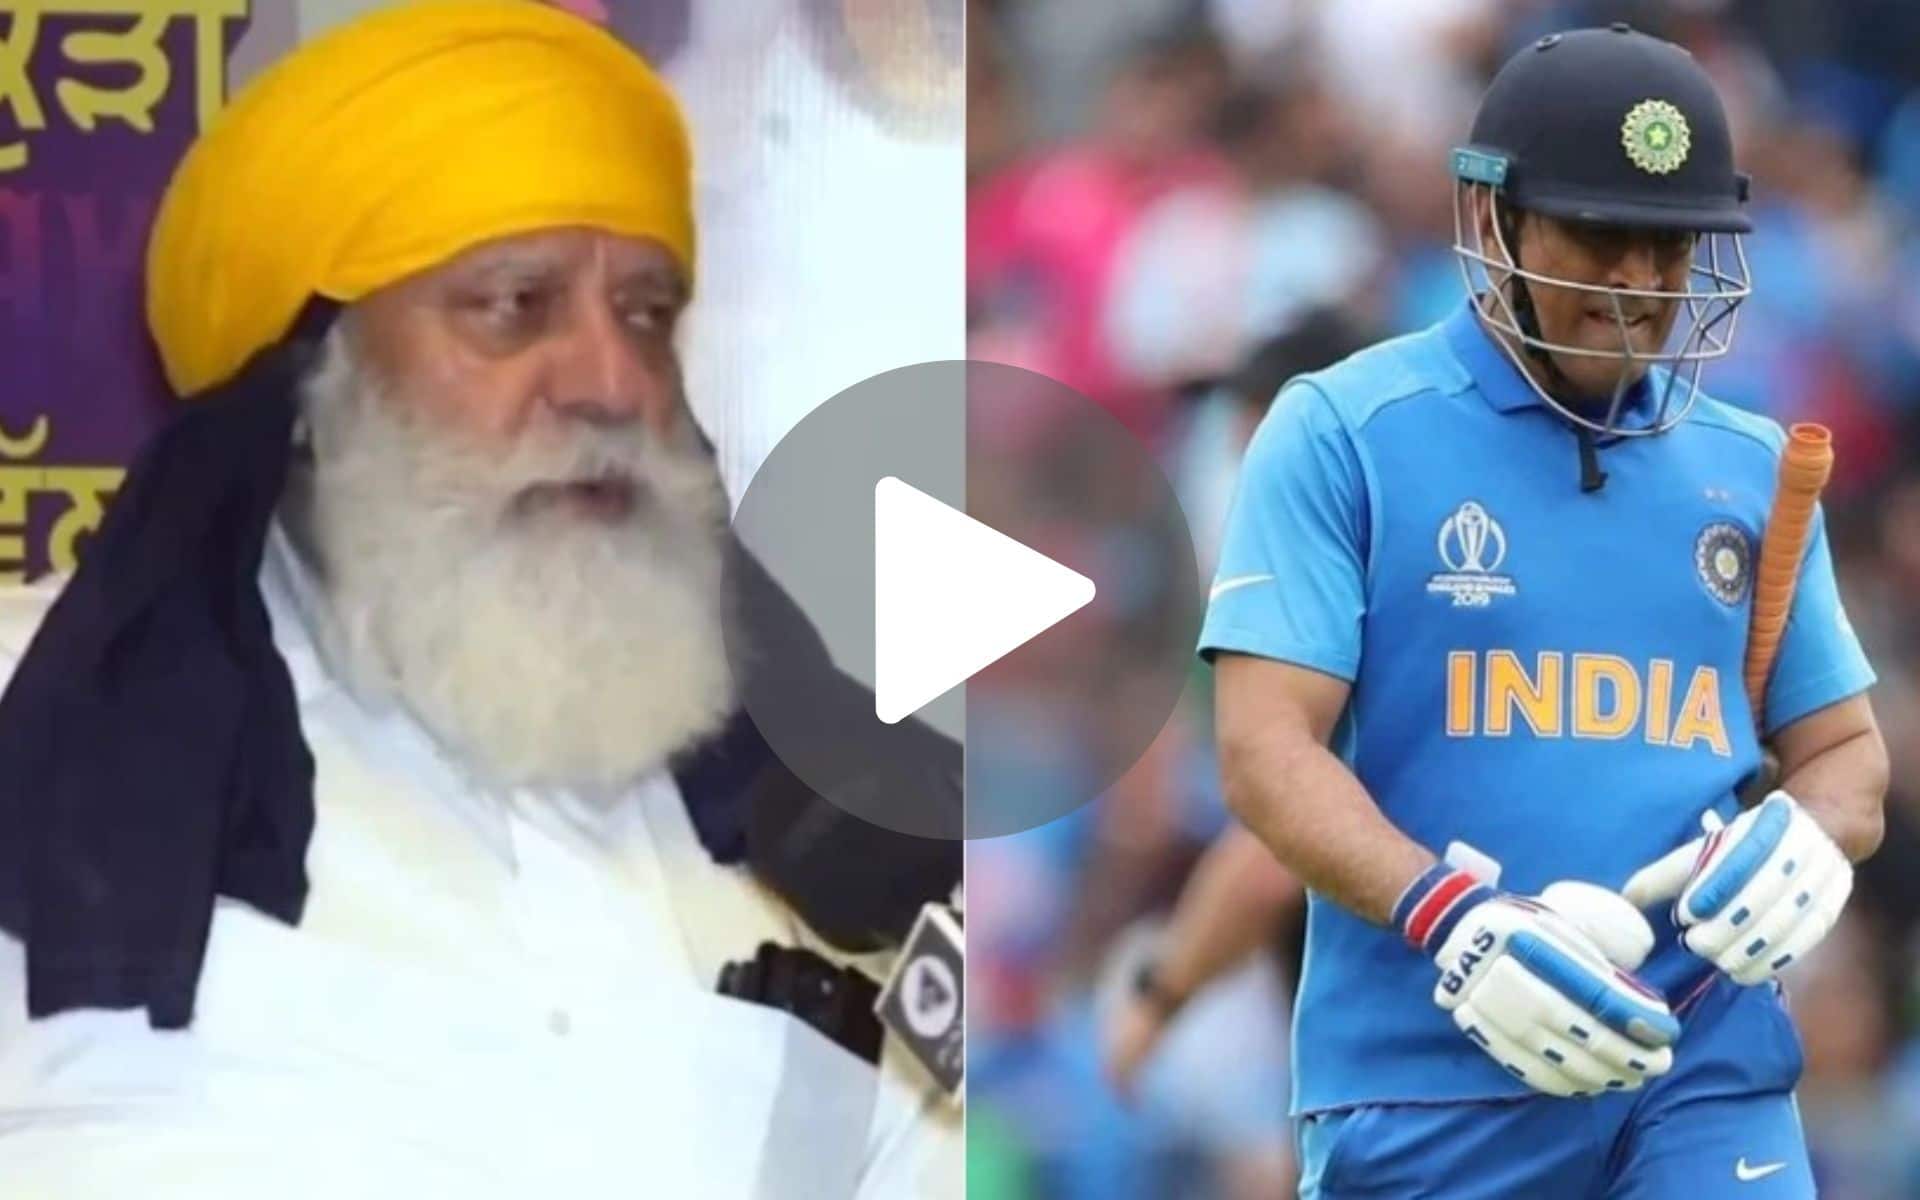 [Watch] 'Dhoni Not There, India Should Win World Cup': Yograj Singh Blasts At Thala